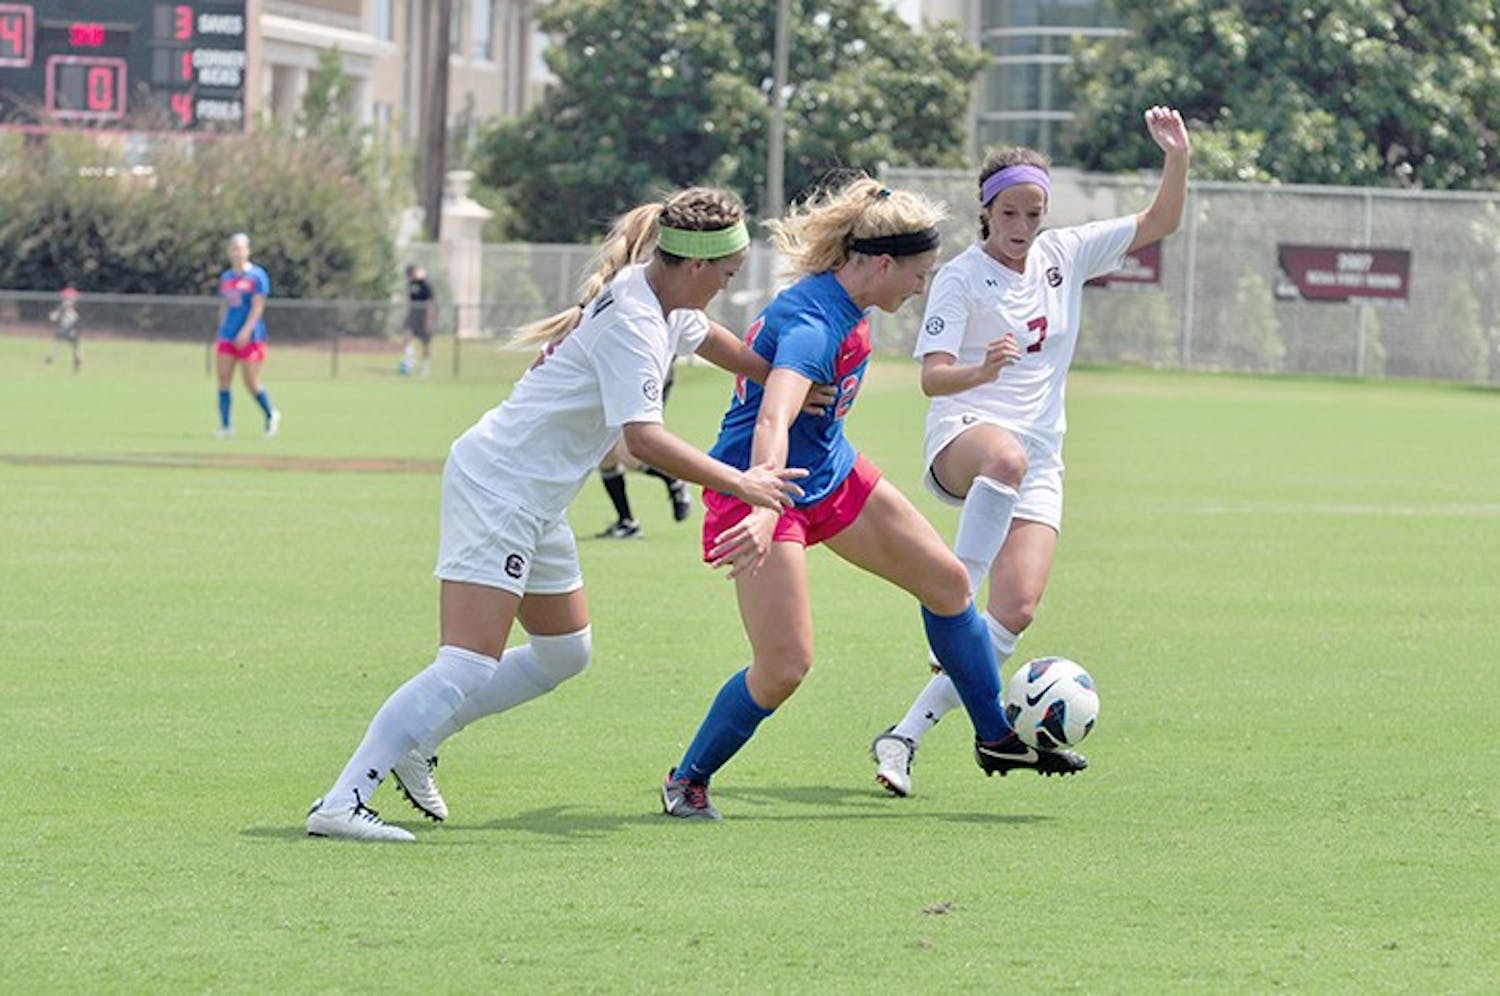 	Senior midfielder Elizabeth Sinclair (7) said fan support will be a major factor in this weekend’s two home games after the team lost to Georgia on the road in its last game.